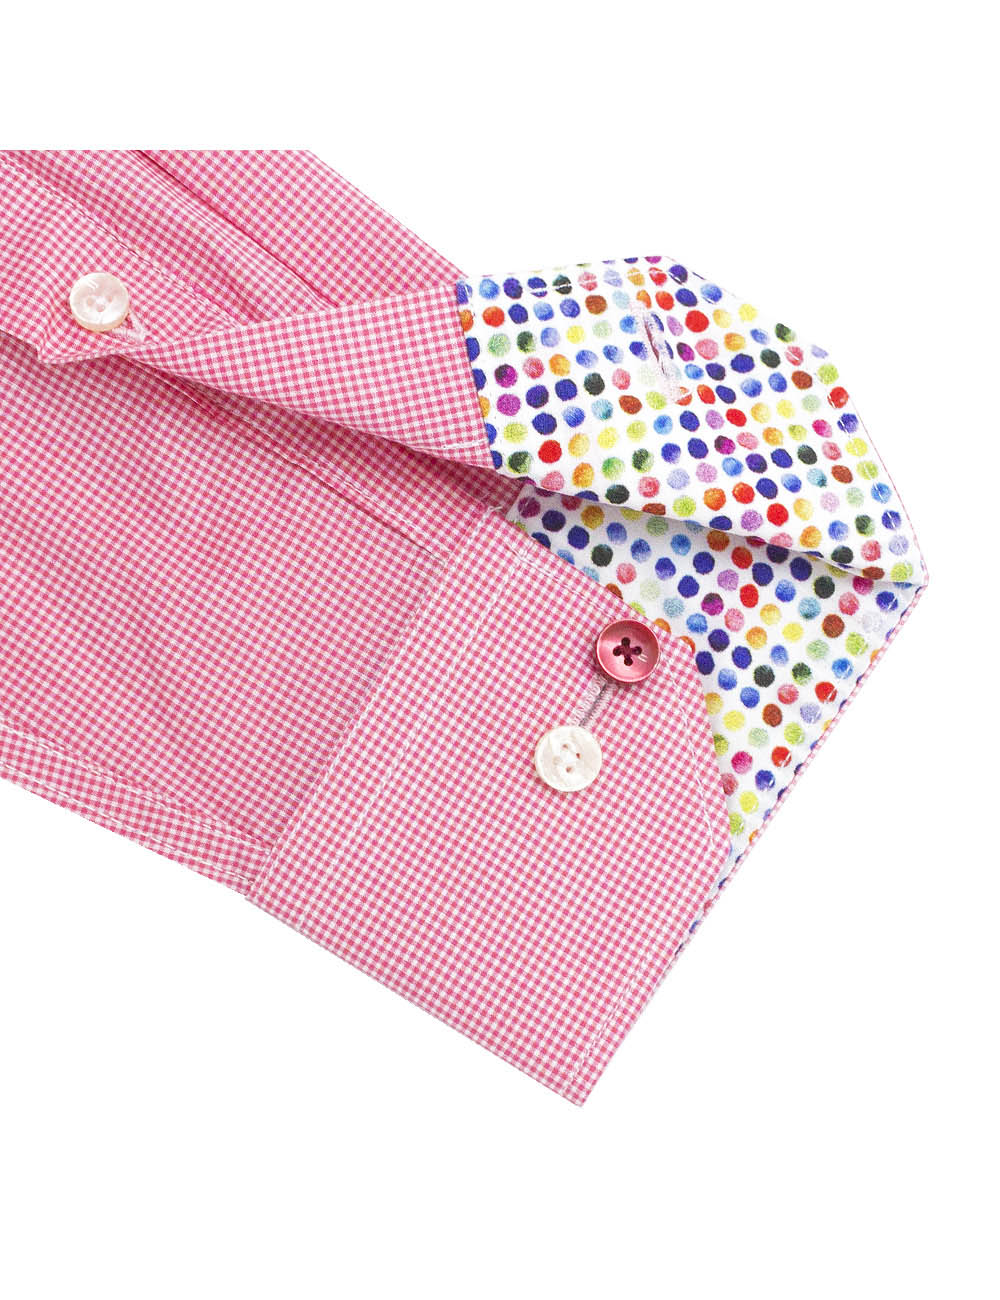 Pink Micro Checks Slim / Tailored Fit Long Sleeve Shirt - TF2A31.20